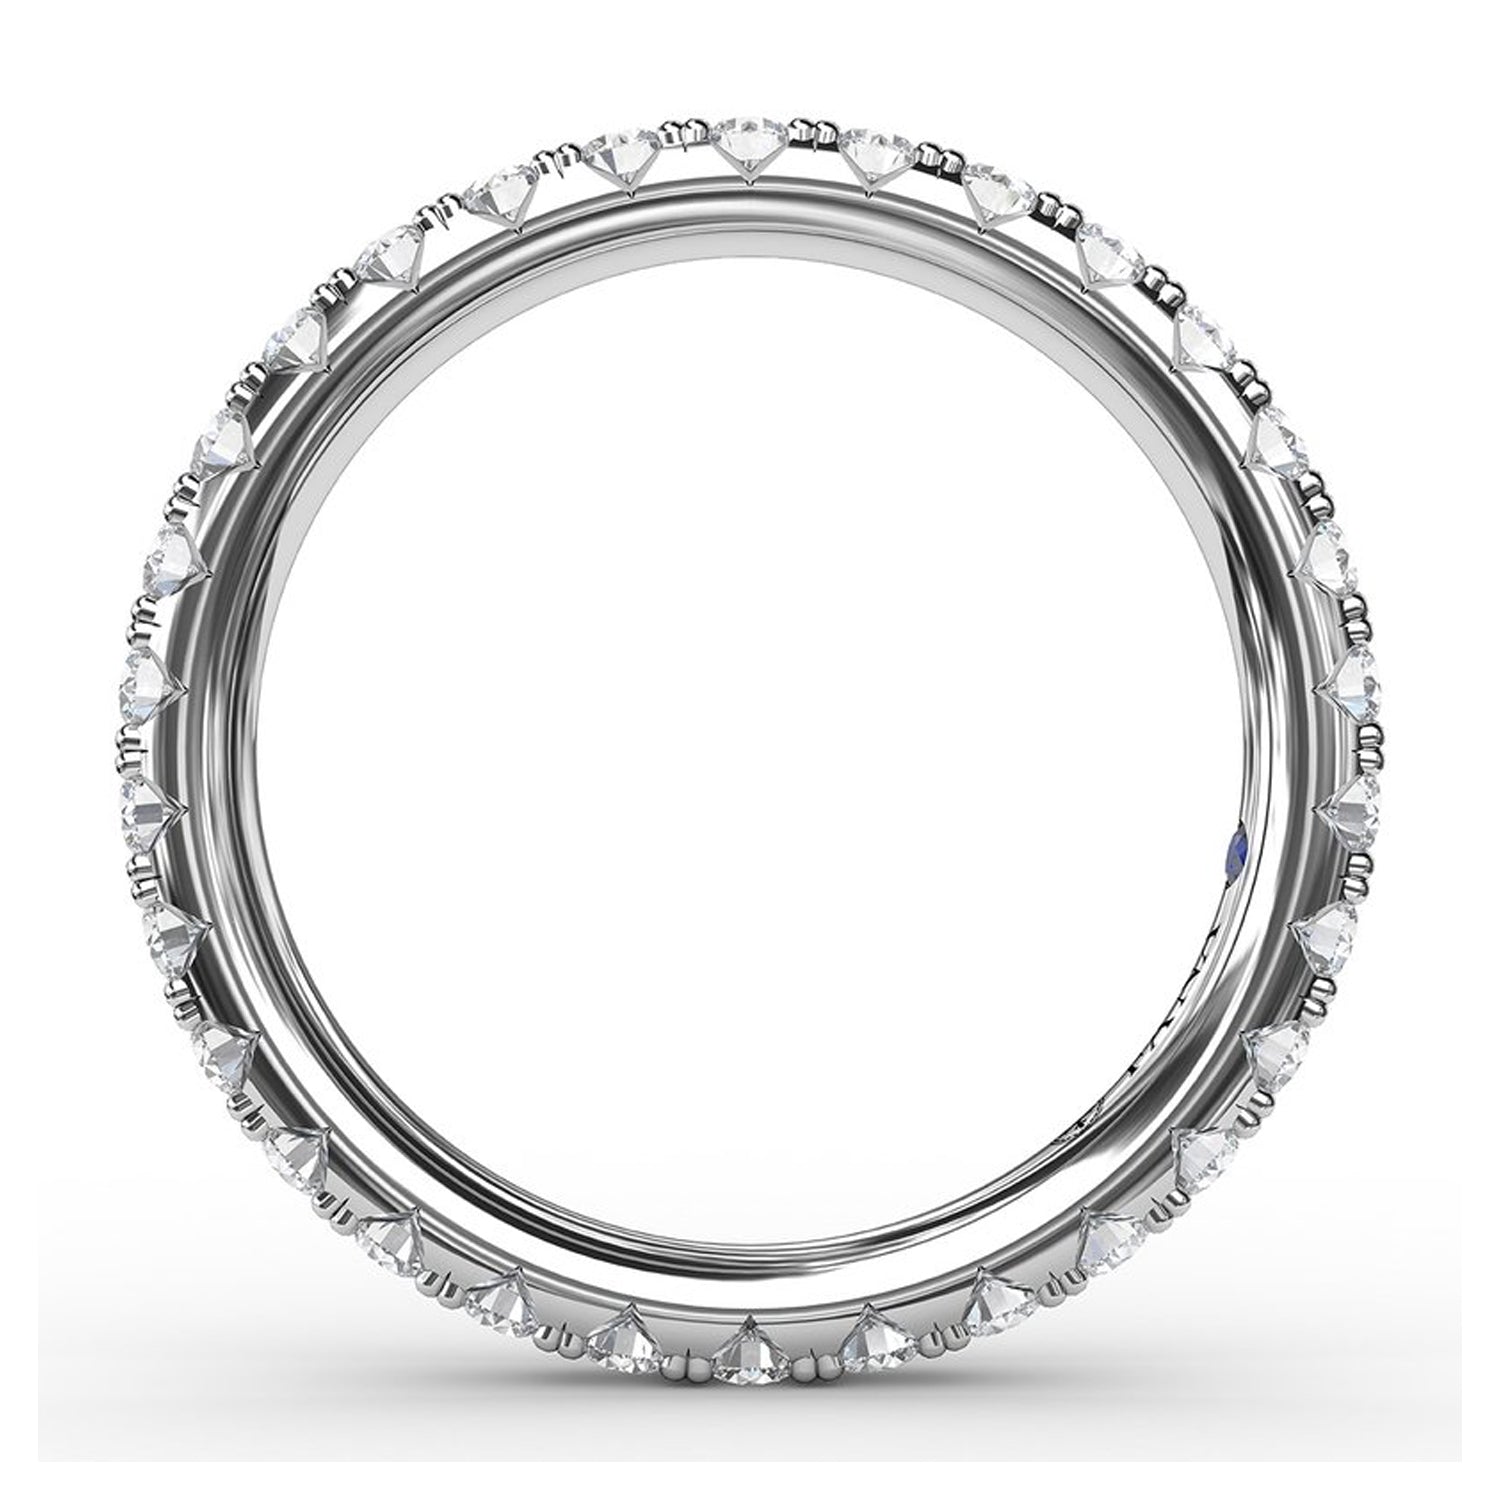 Fana Chunky Pave Diamond Anniversary Band in 14kt White Gold (1ct tw)